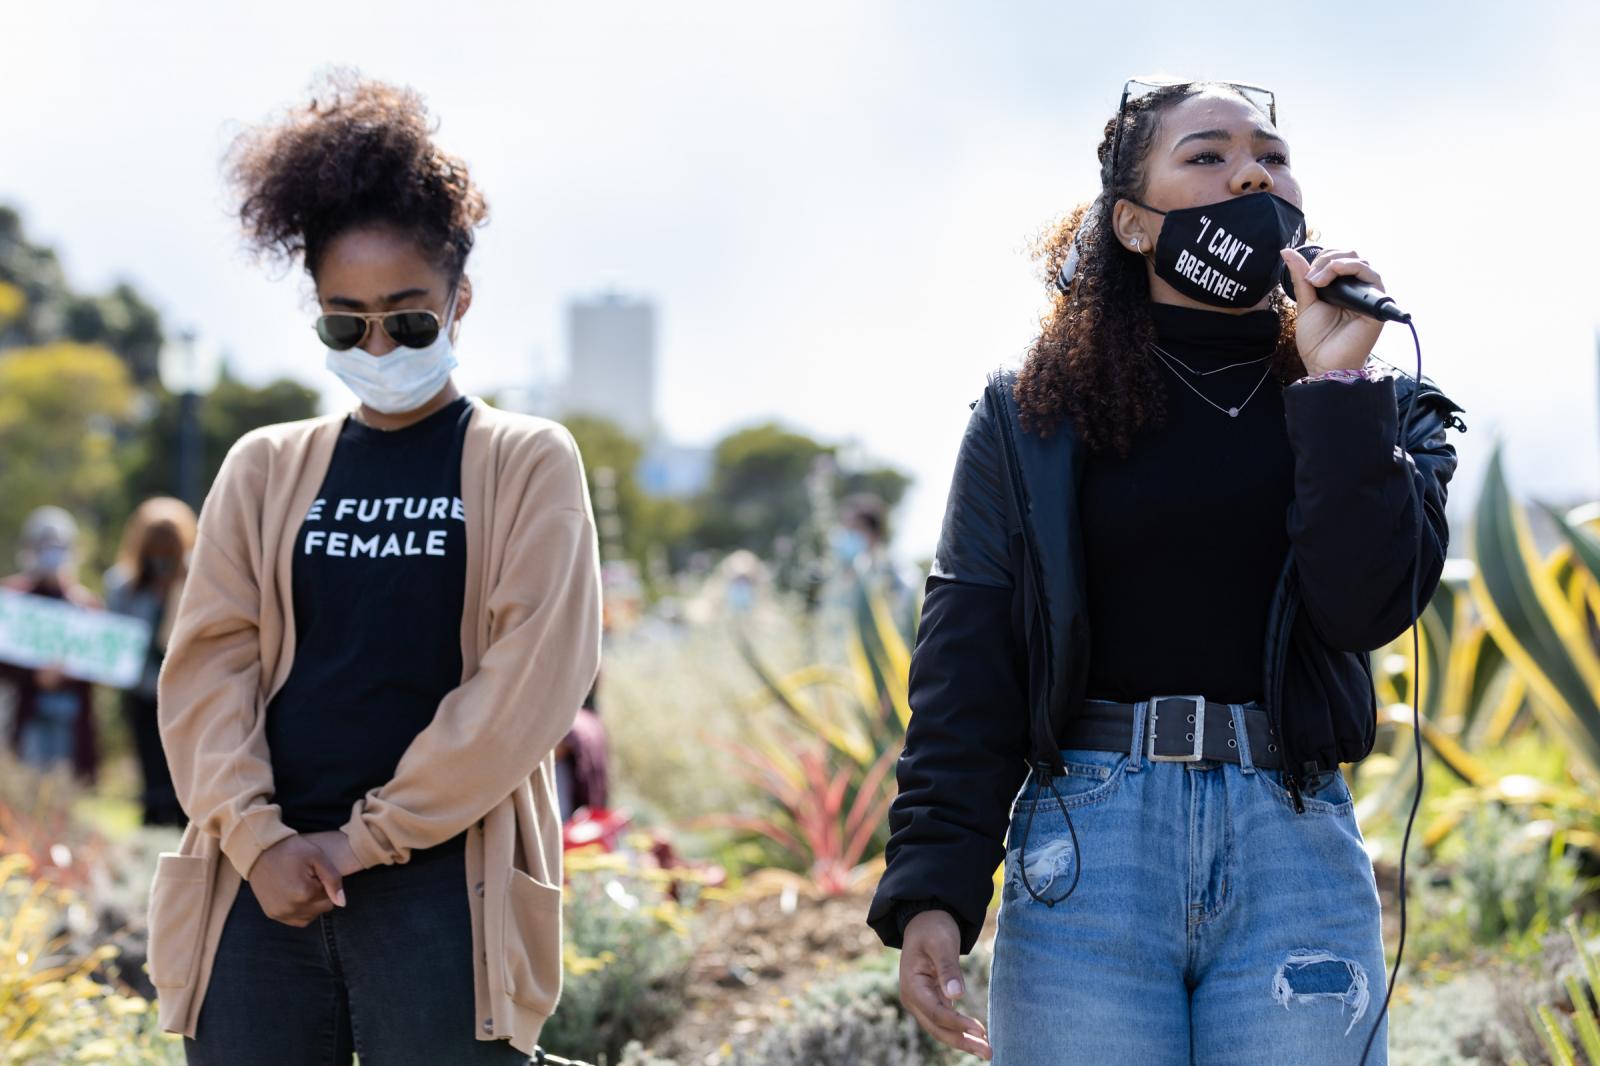  Tiana Day, 17, (right) and Zoe...2020, in San Francisco, Calif. 